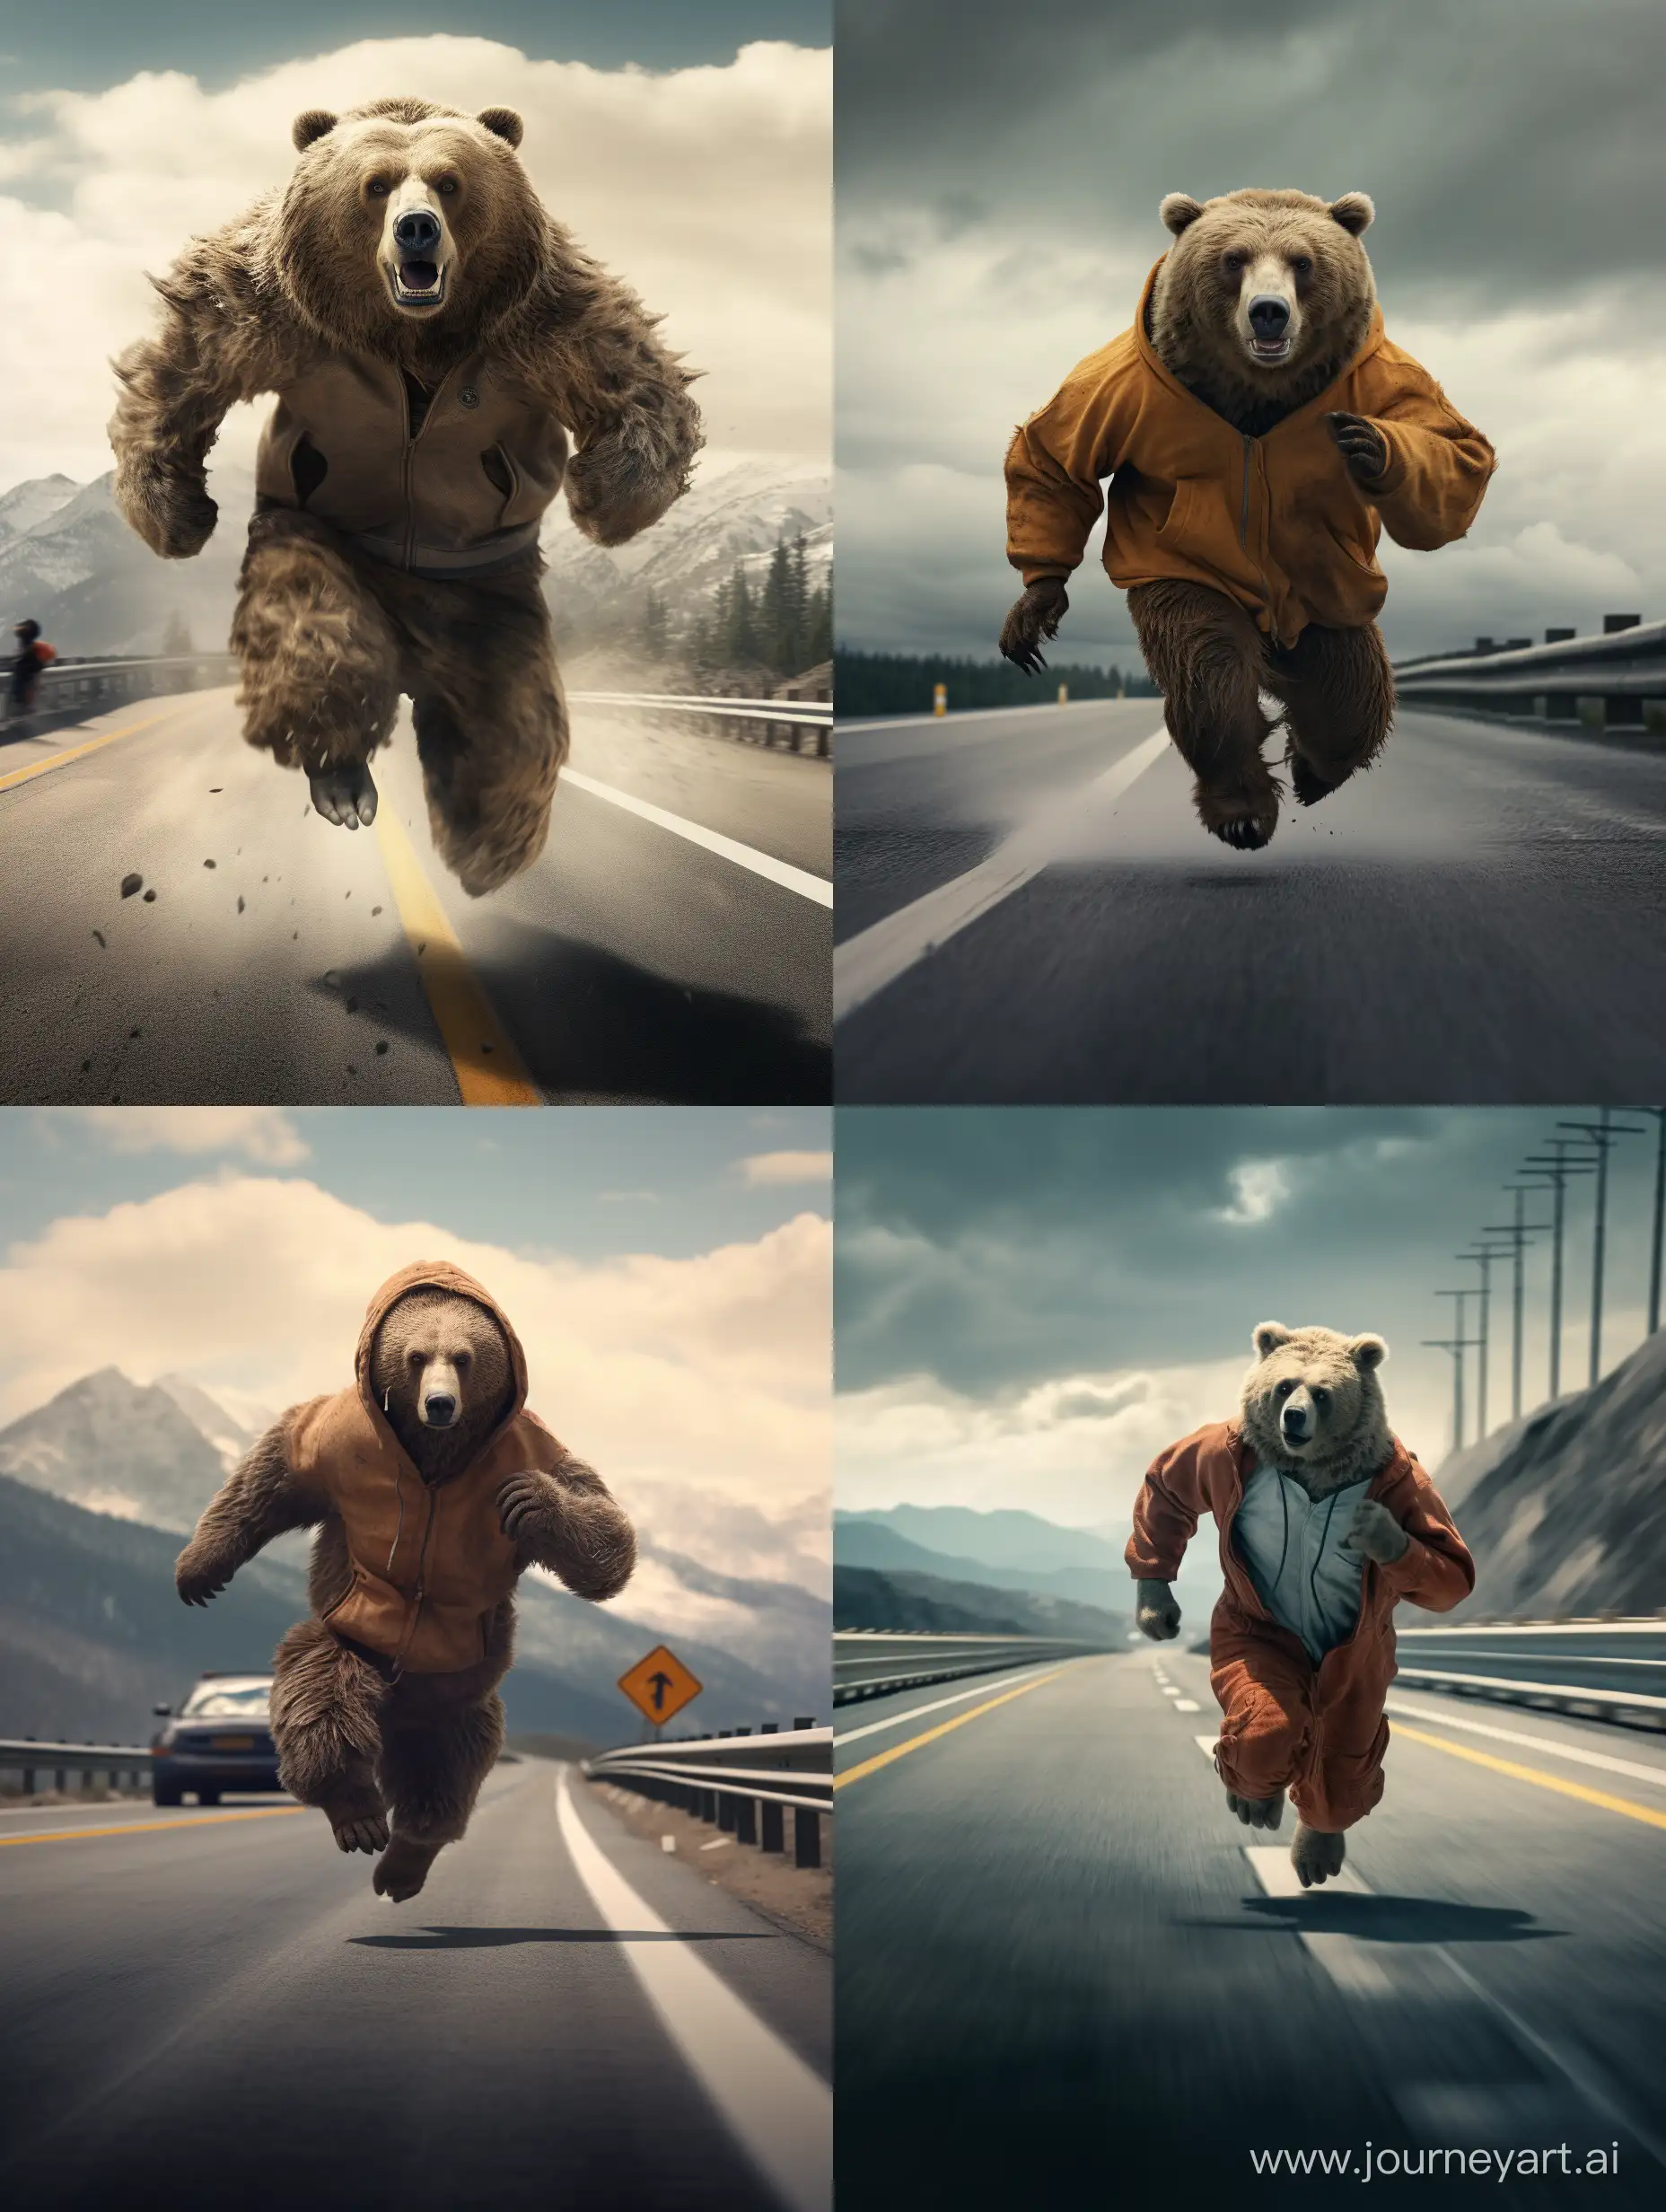 Adventurous-Bear-Sprinting-on-a-MidJourney-Highway-in-Stylish-Jacket-and-Pants